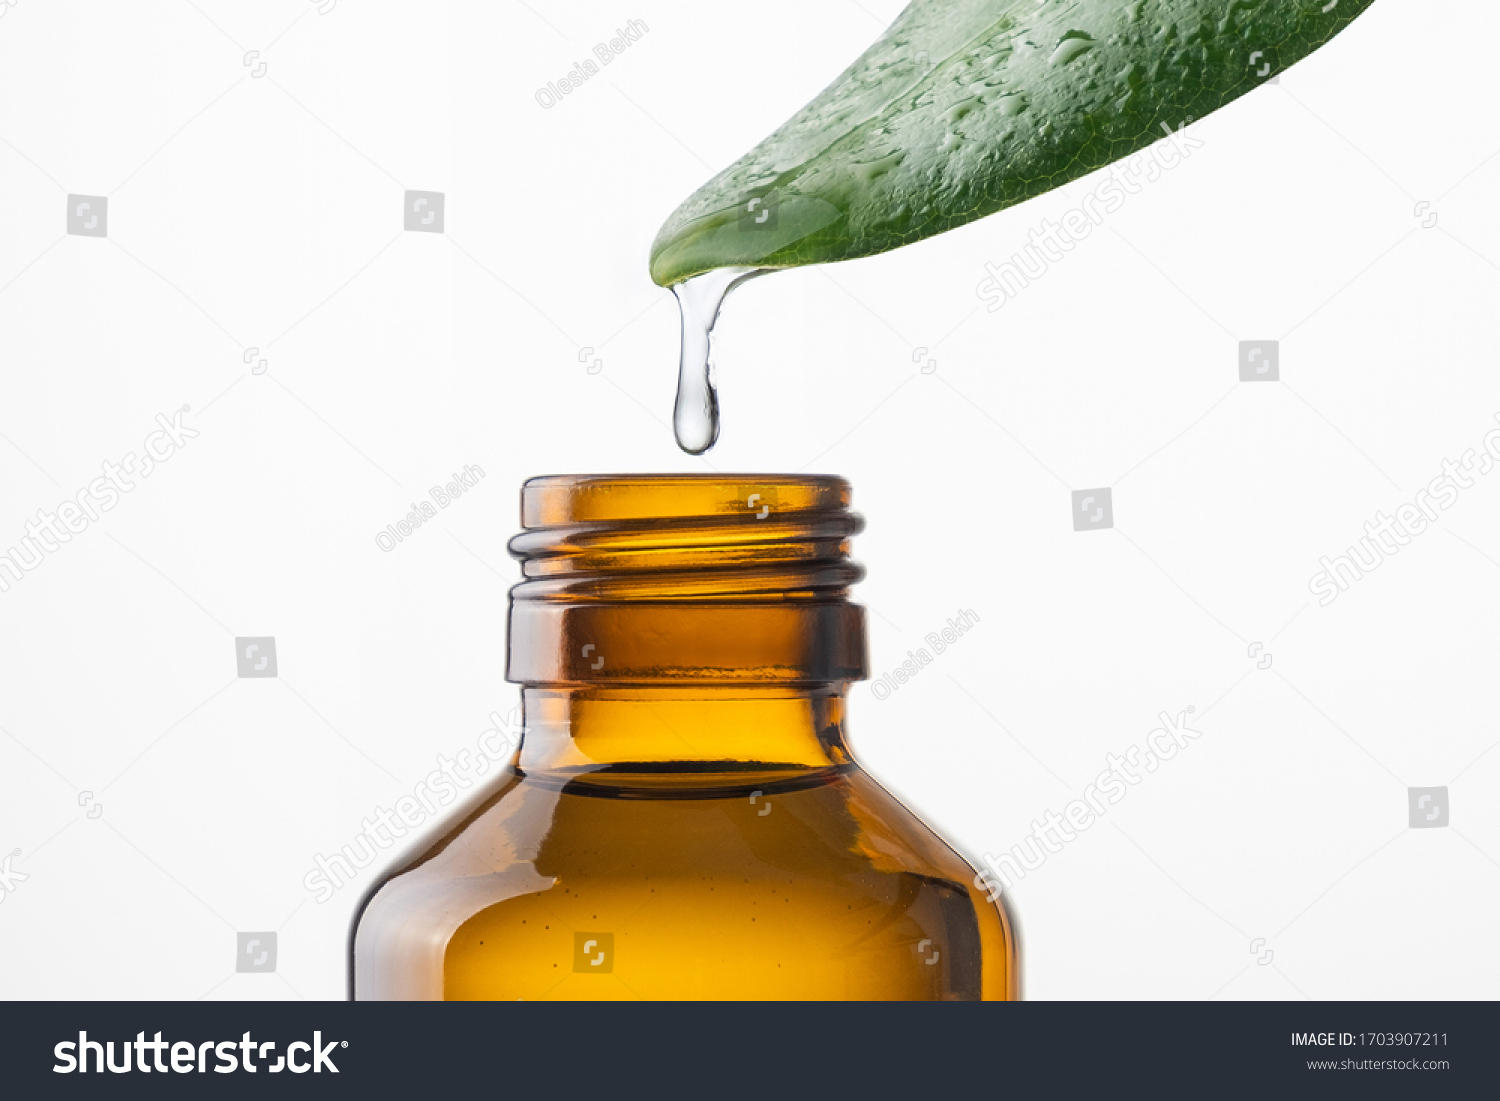 Alternative medicine and remedy, herbal natural cosmetics, aromatherapy and essential oil concept. Water drop falling from leaf into bottle over white background #1703907211